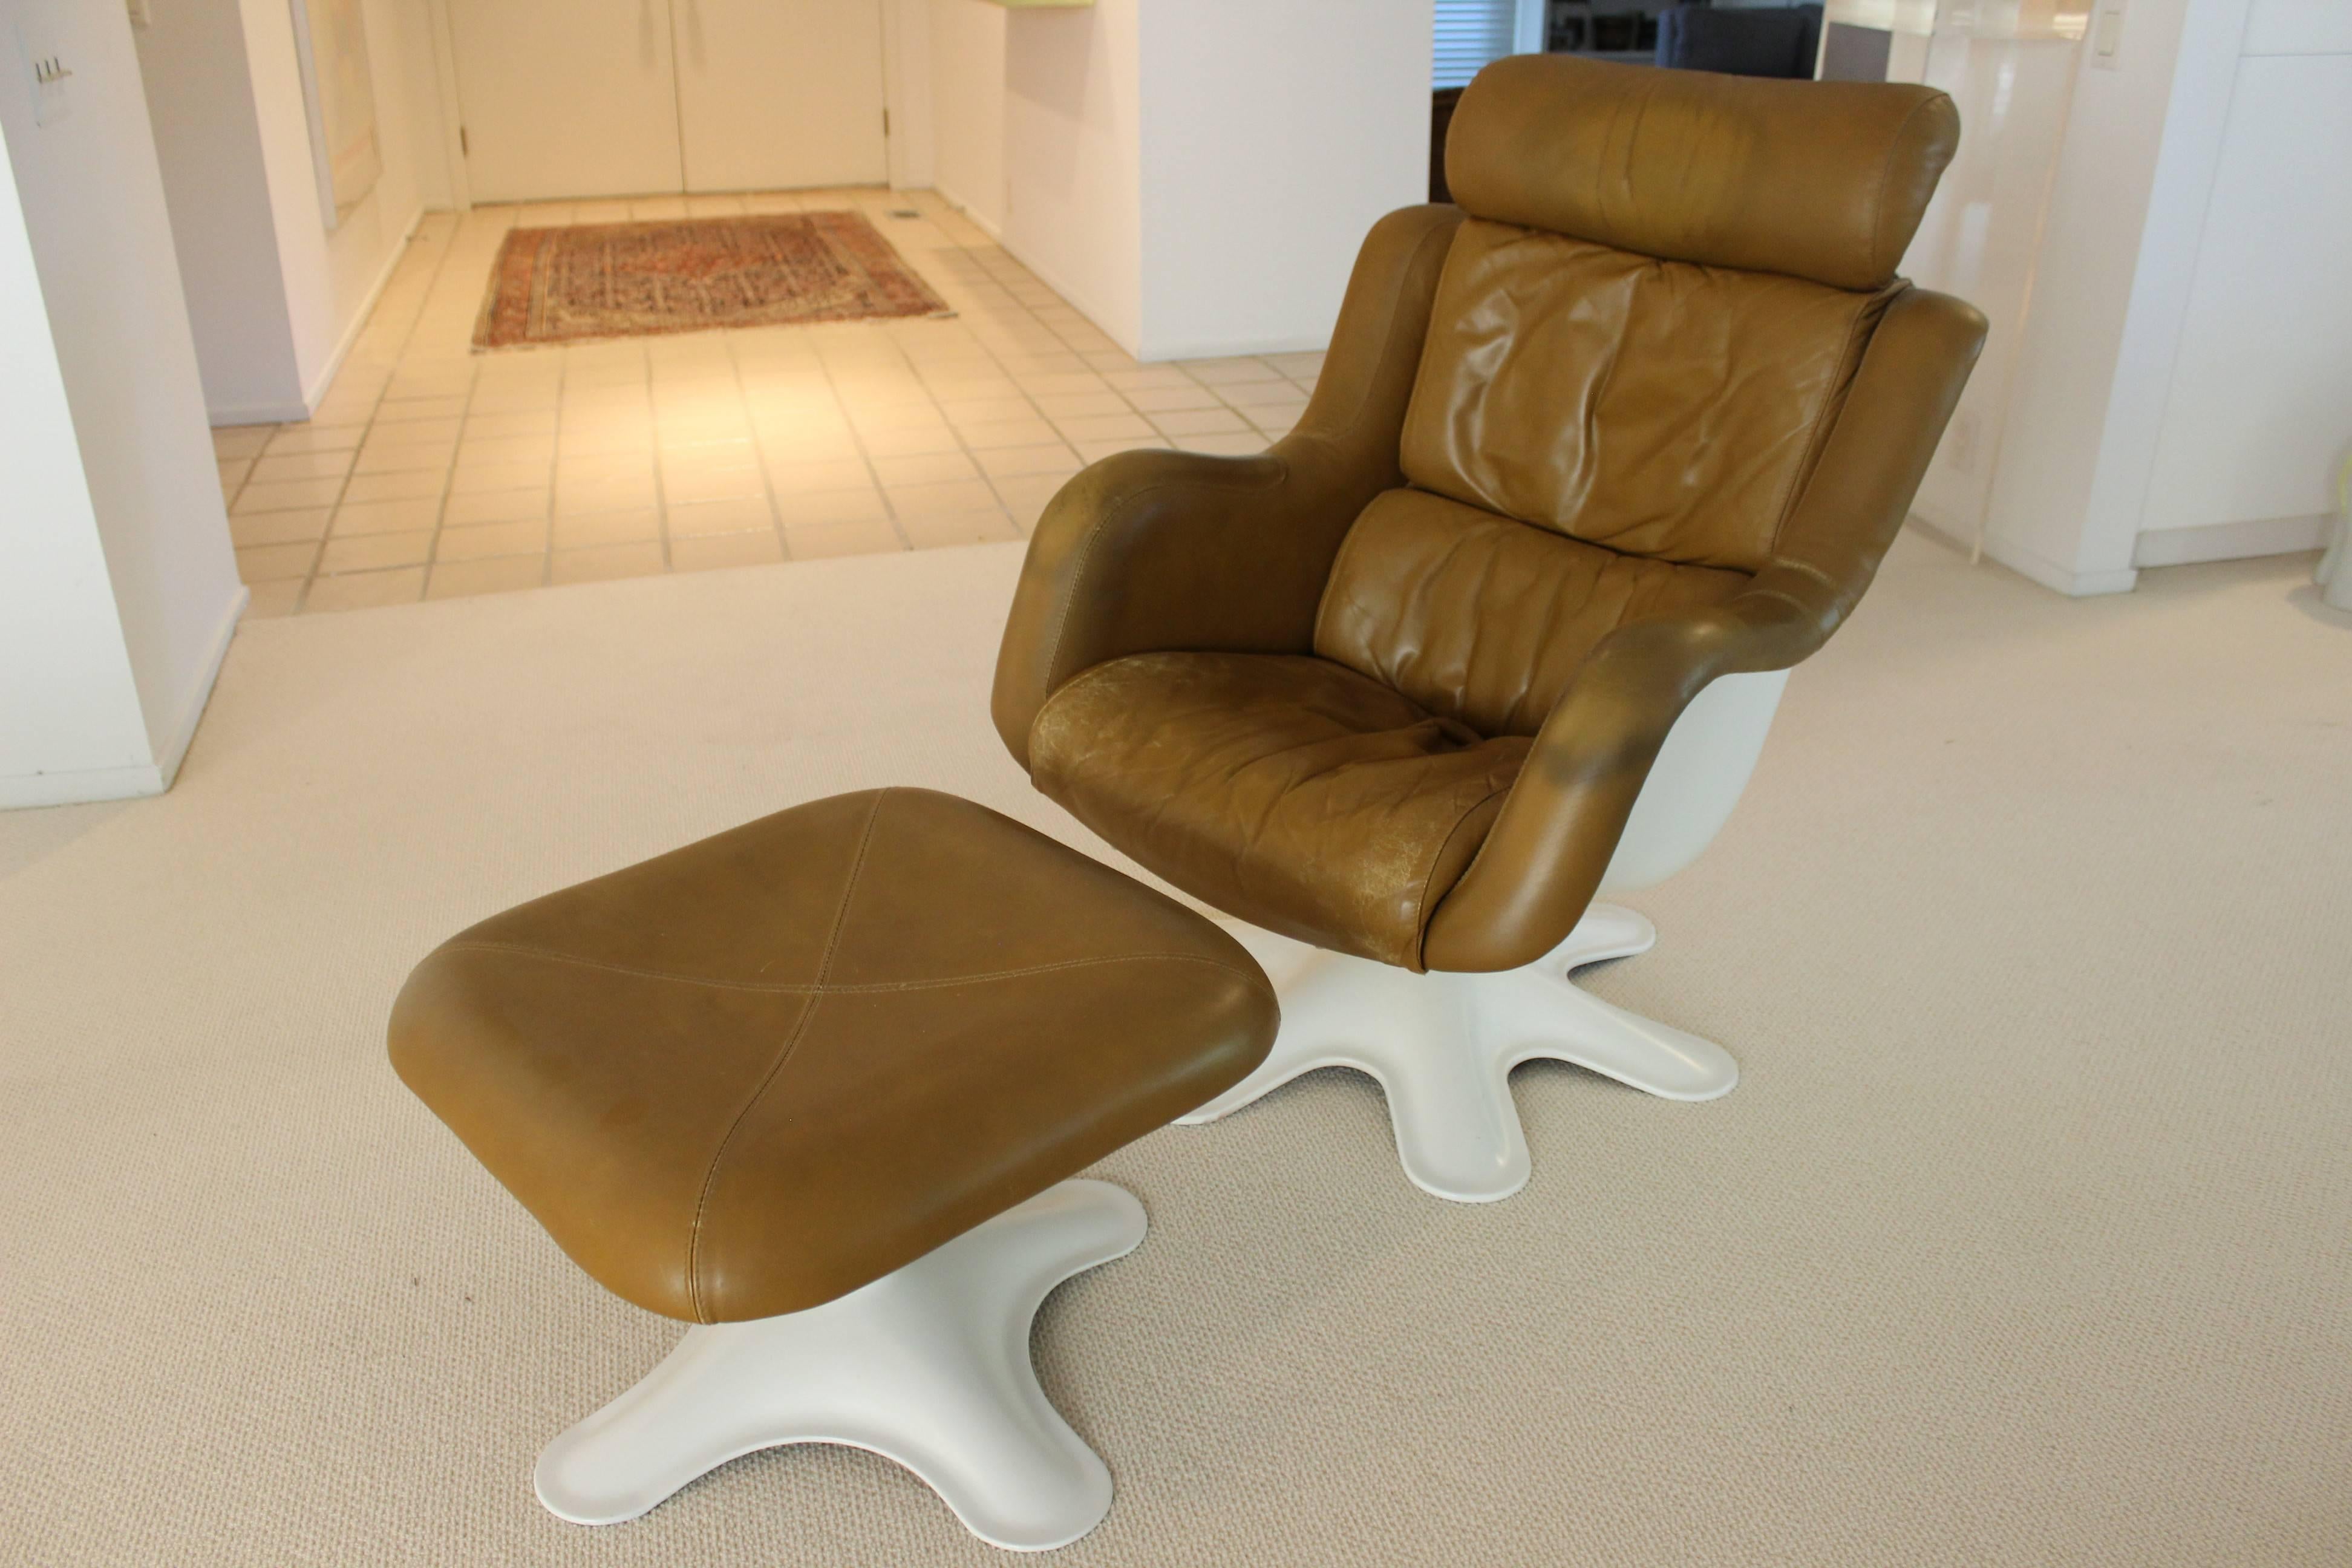 For your consideration is a Mid-Century Modern masterpiece. Made in 1964, this Yrjö Kukkapuro adjustable chair and ottoman is a Classic Mid-Century Modern must have! Yrjö Kukkapuro is a Finnish furniture designer and interior architect most famous